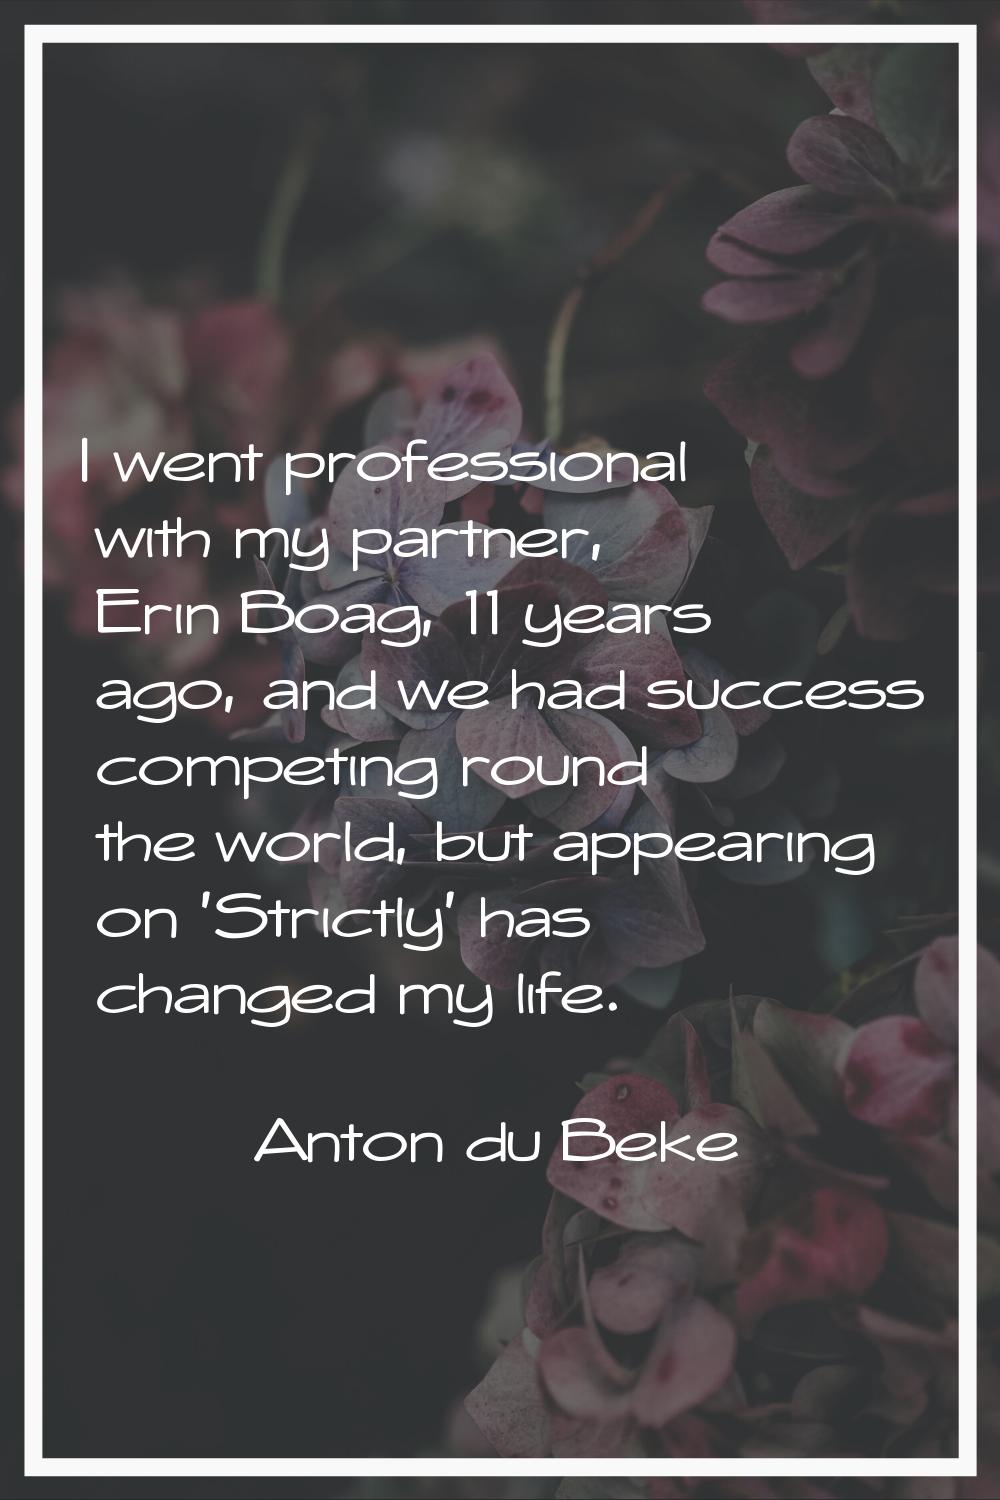 I went professional with my partner, Erin Boag, 11 years ago, and we had success competing round th